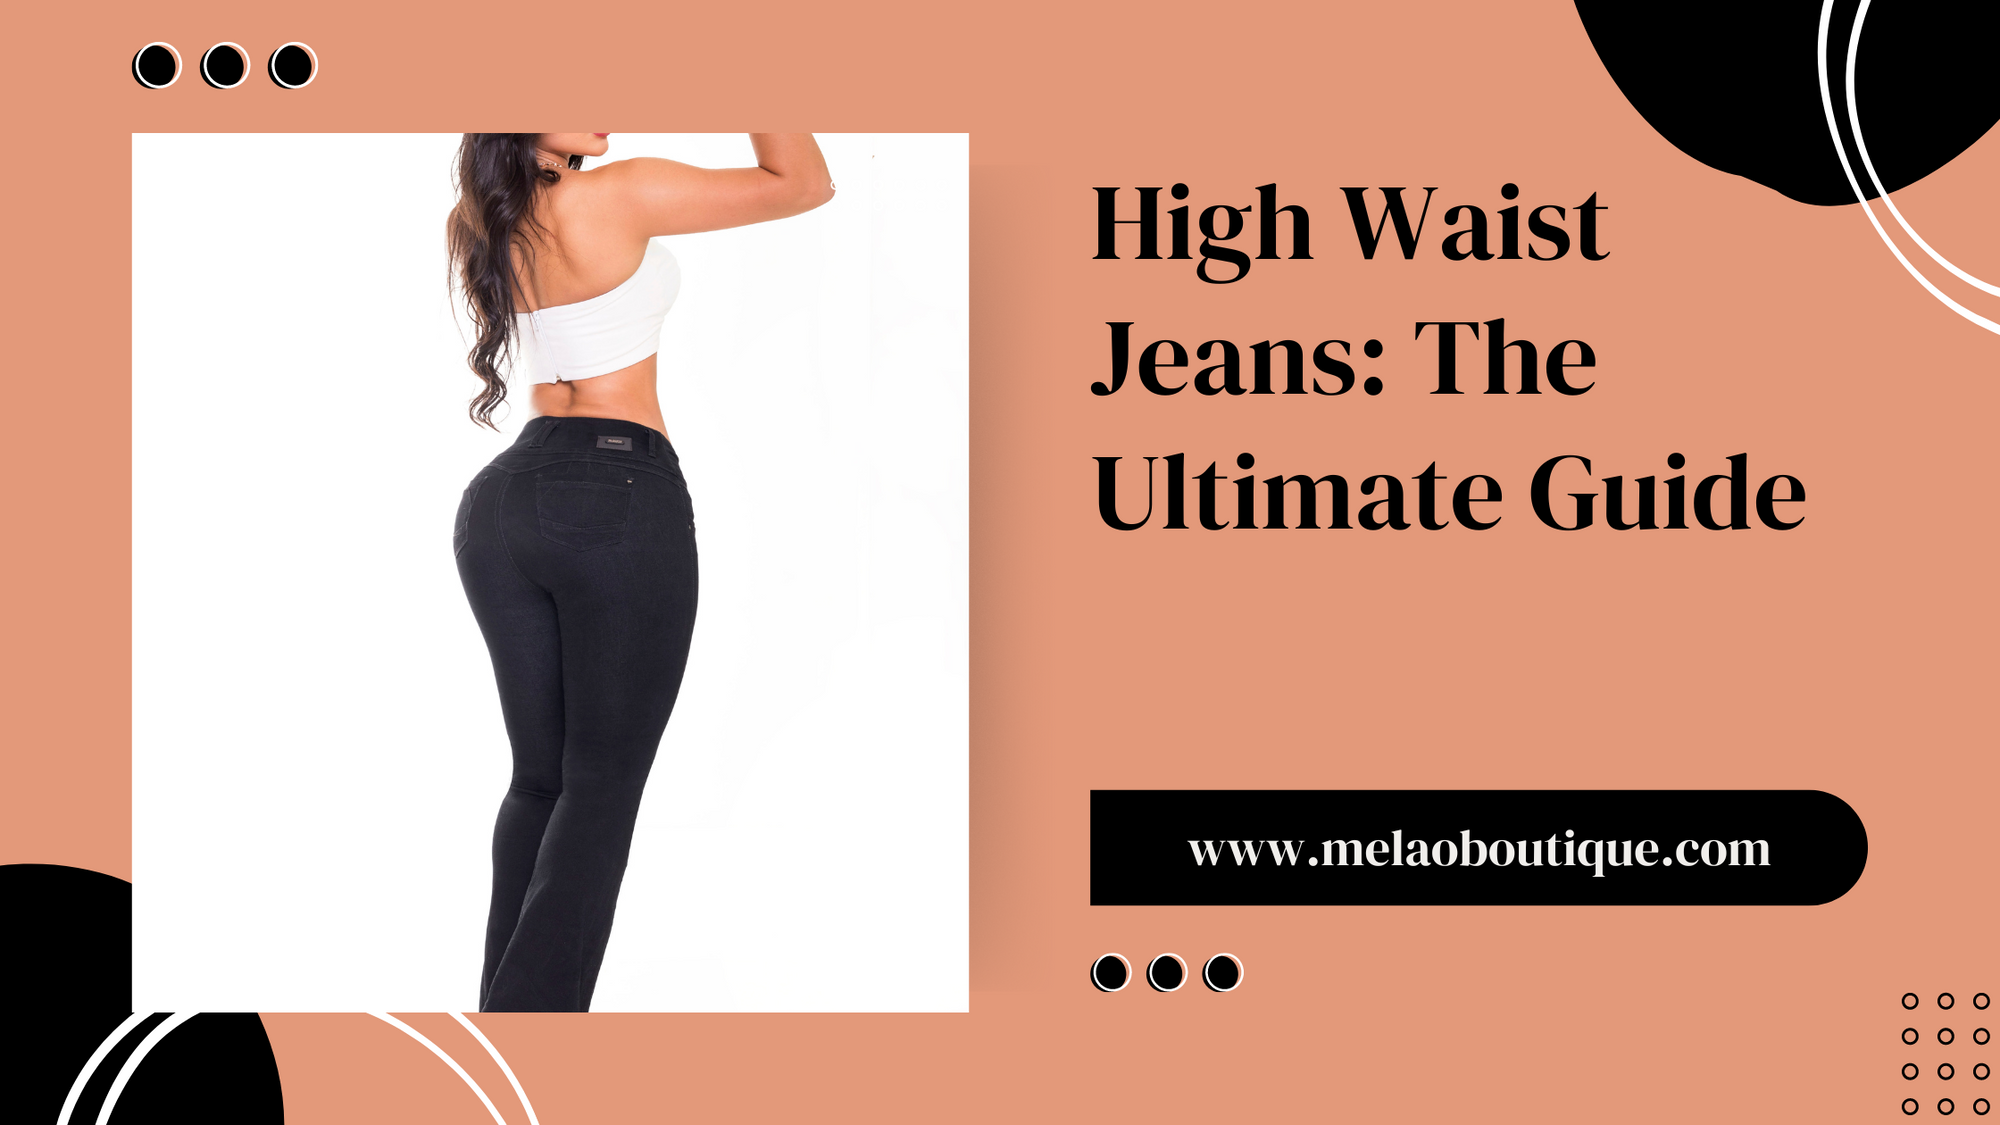 High Waist Jeans: The Ultimate Guide